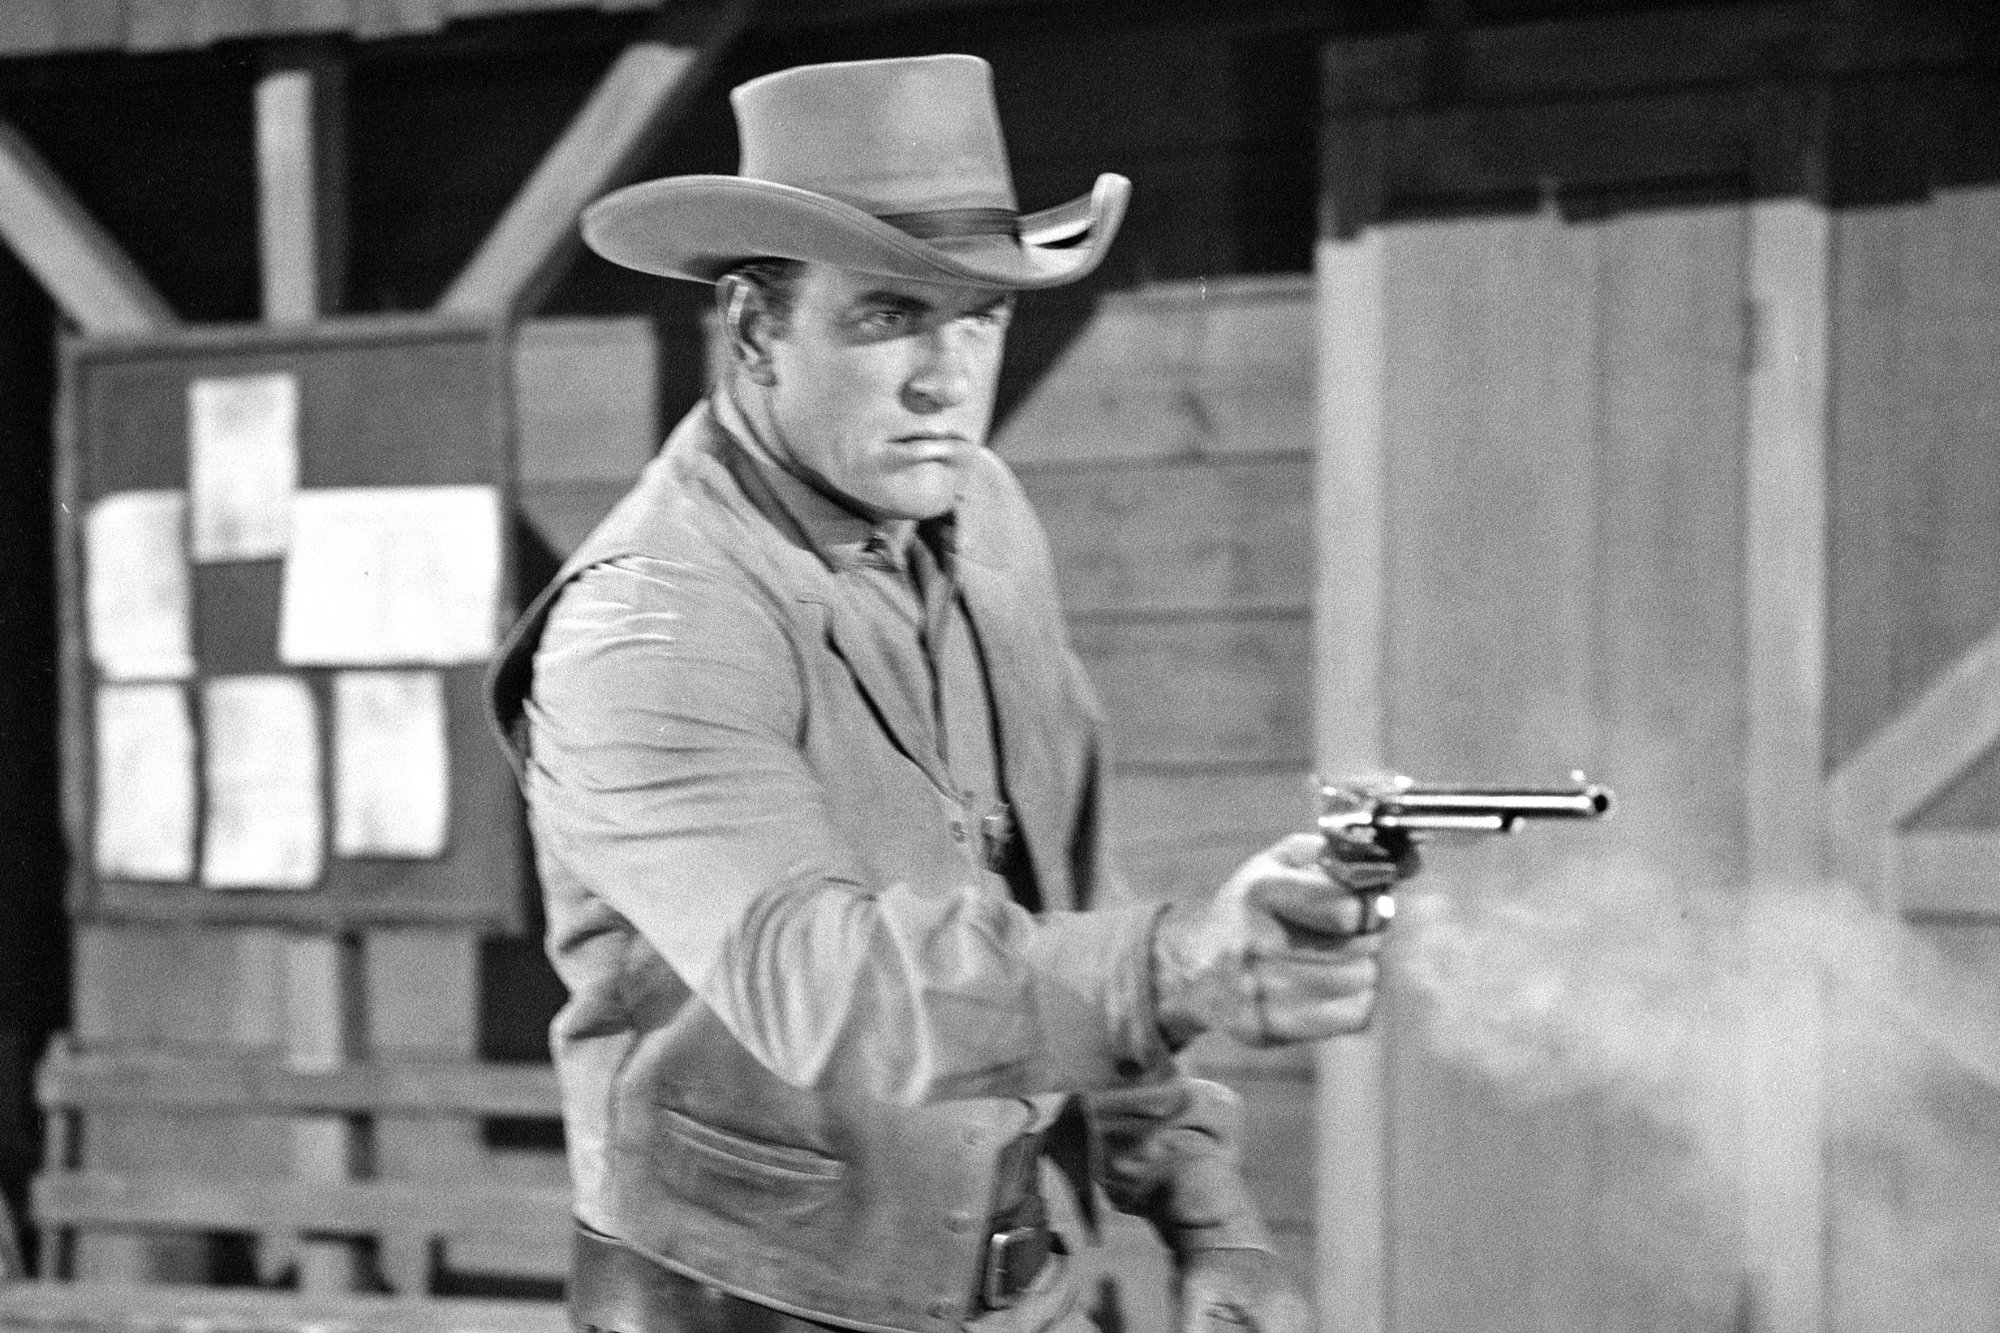 'Gunsmoke' James Arness as Matt Dillon until CBS decided to cancel it. He's wearing a Western costume and holding his gun out with smoke coming from firing it.